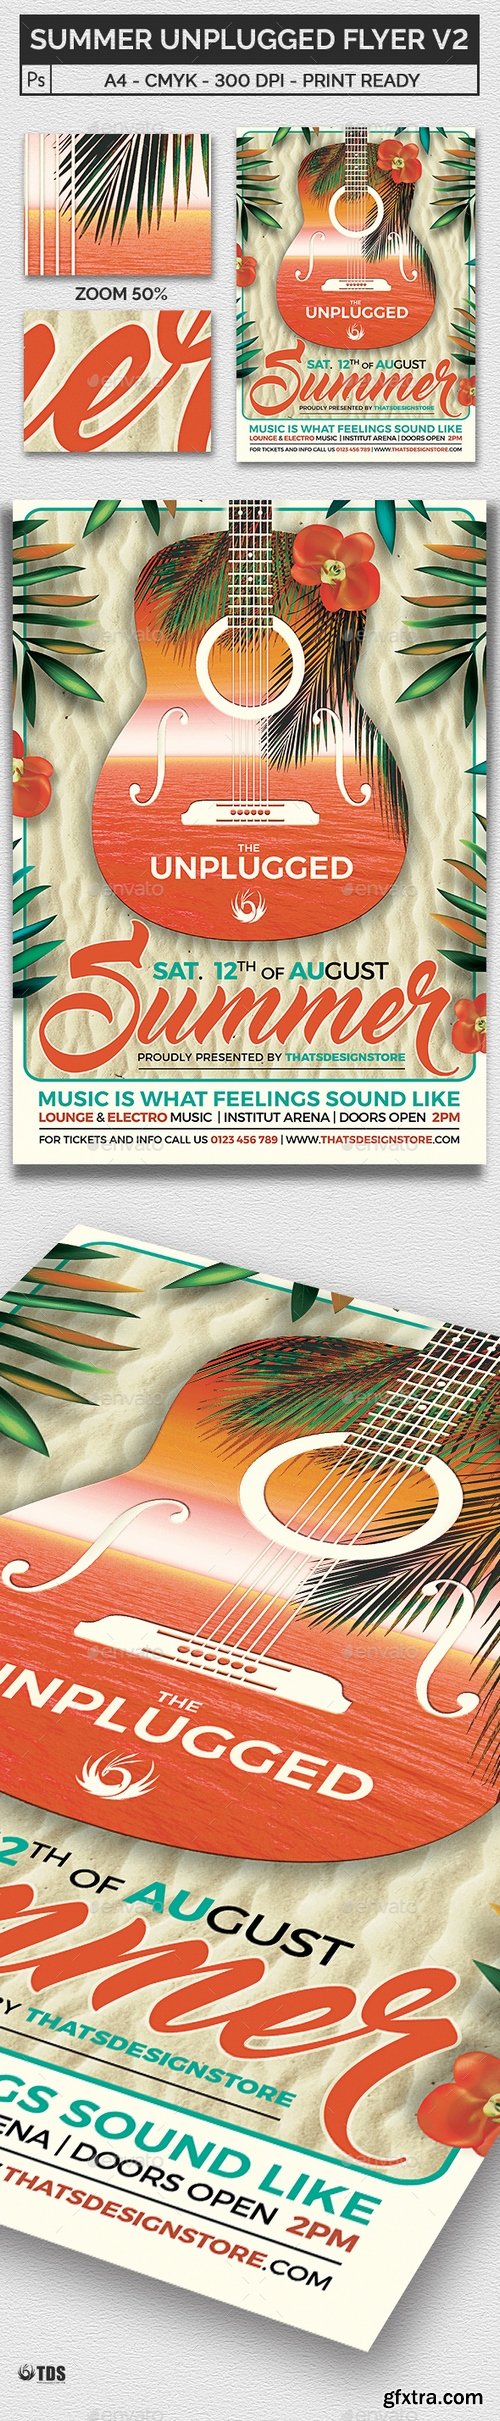 Graphicriver - Summer Unplugged Flyer Template V2 16831905